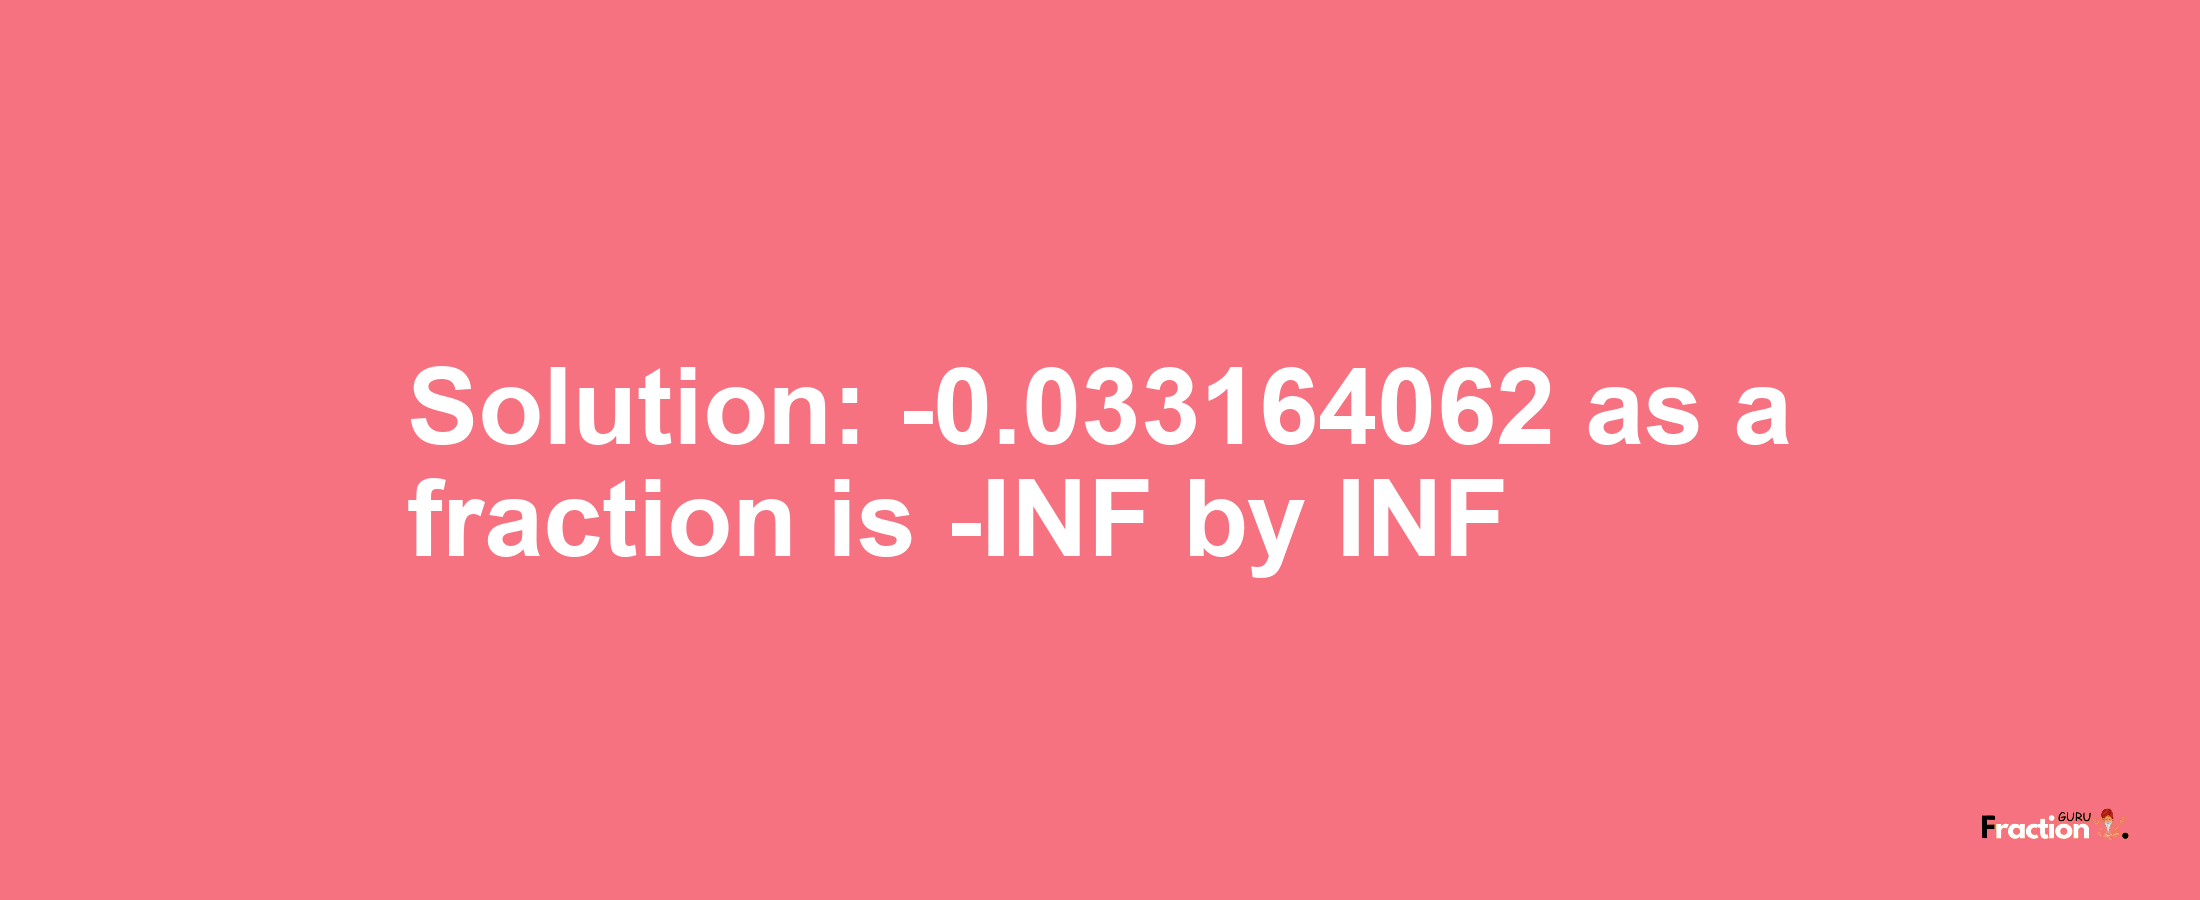 Solution:-0.033164062 as a fraction is -INF/INF